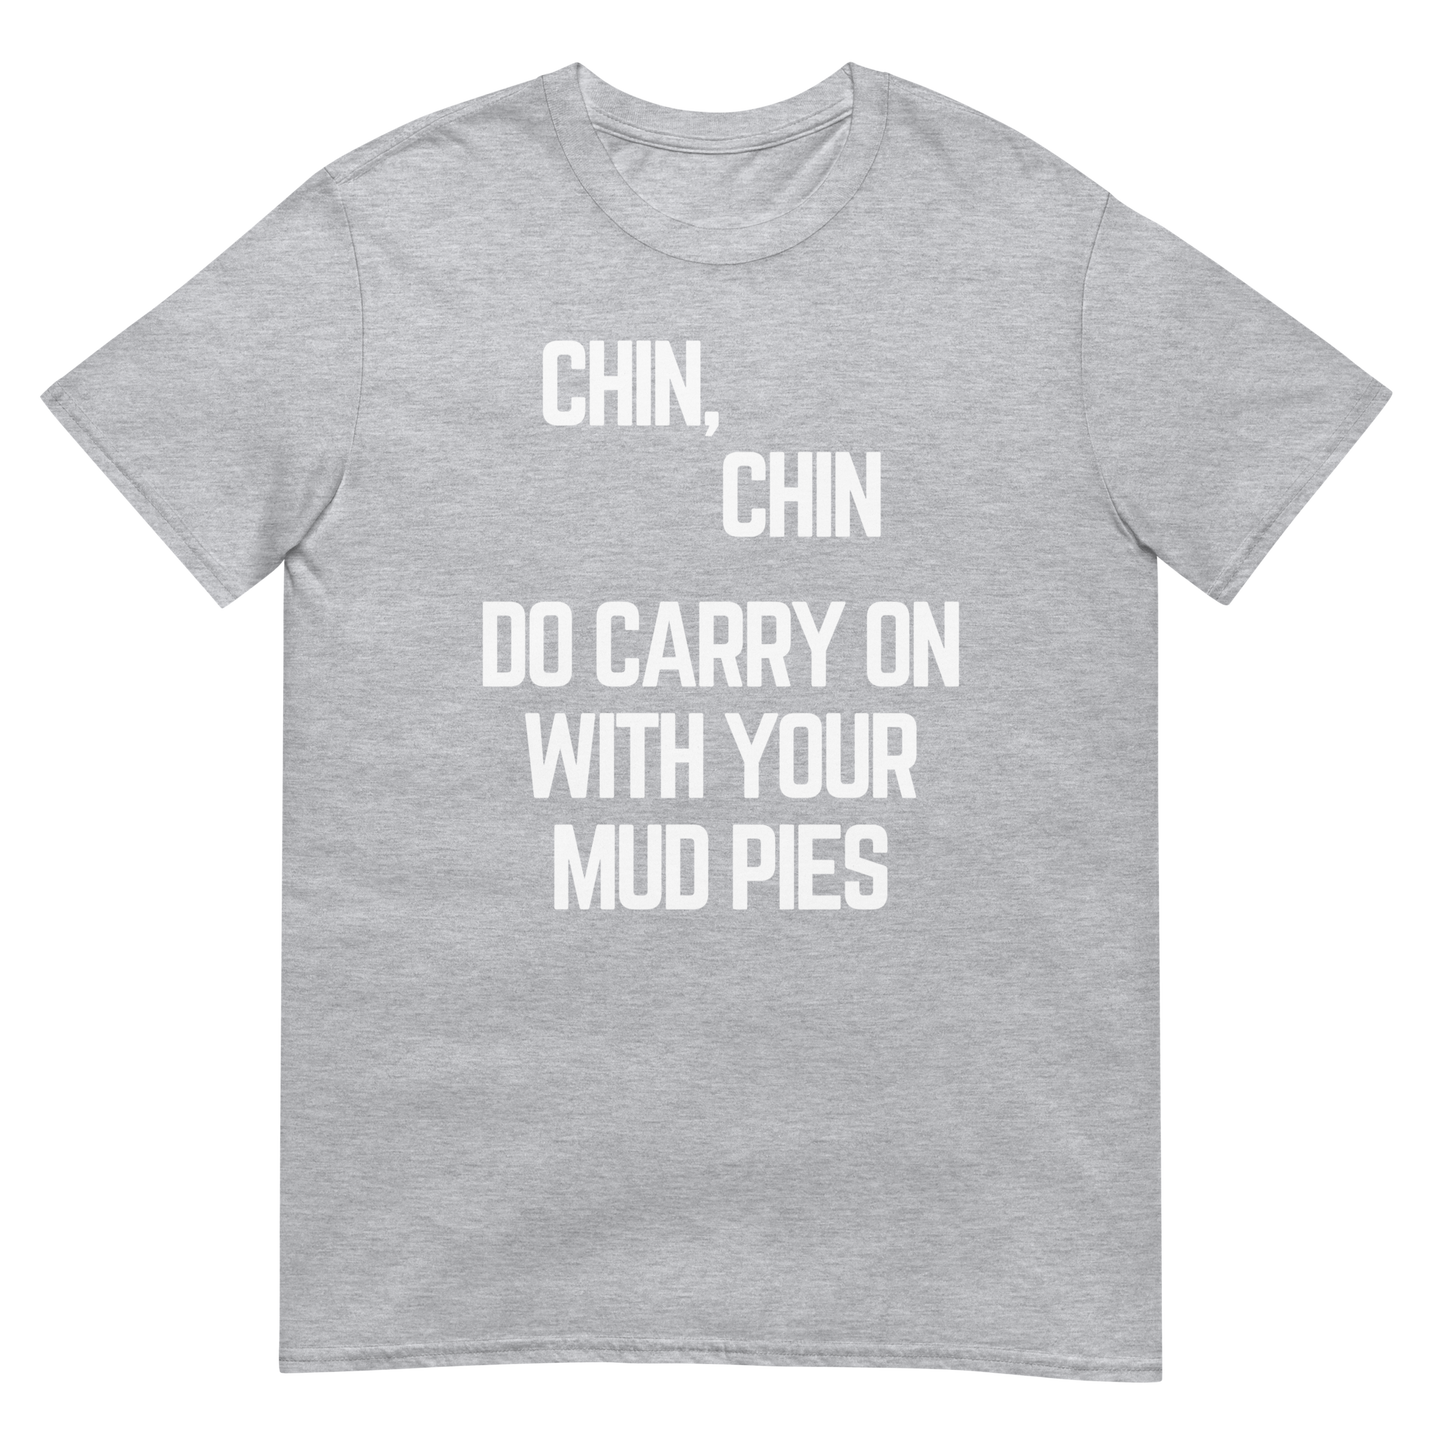 Chin, Chin, Do Carry On With Your Mud Pies. (t-shirt)